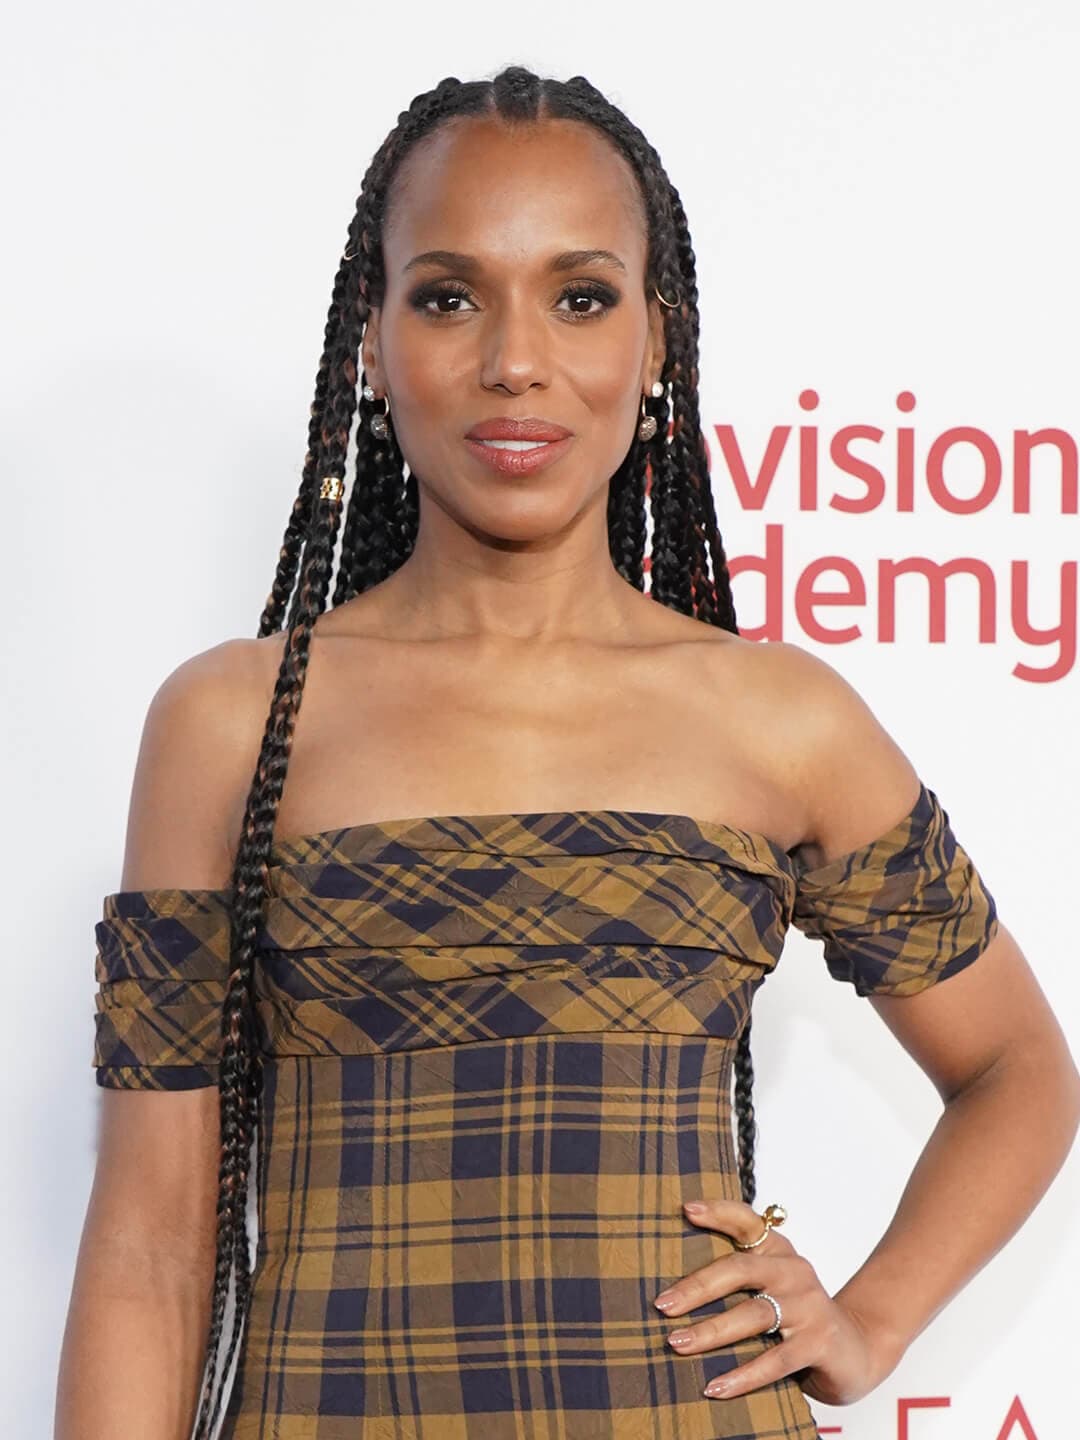 Kerry Washington in a plaid dress rocking a long goddess braid hairstyle embellished with charms